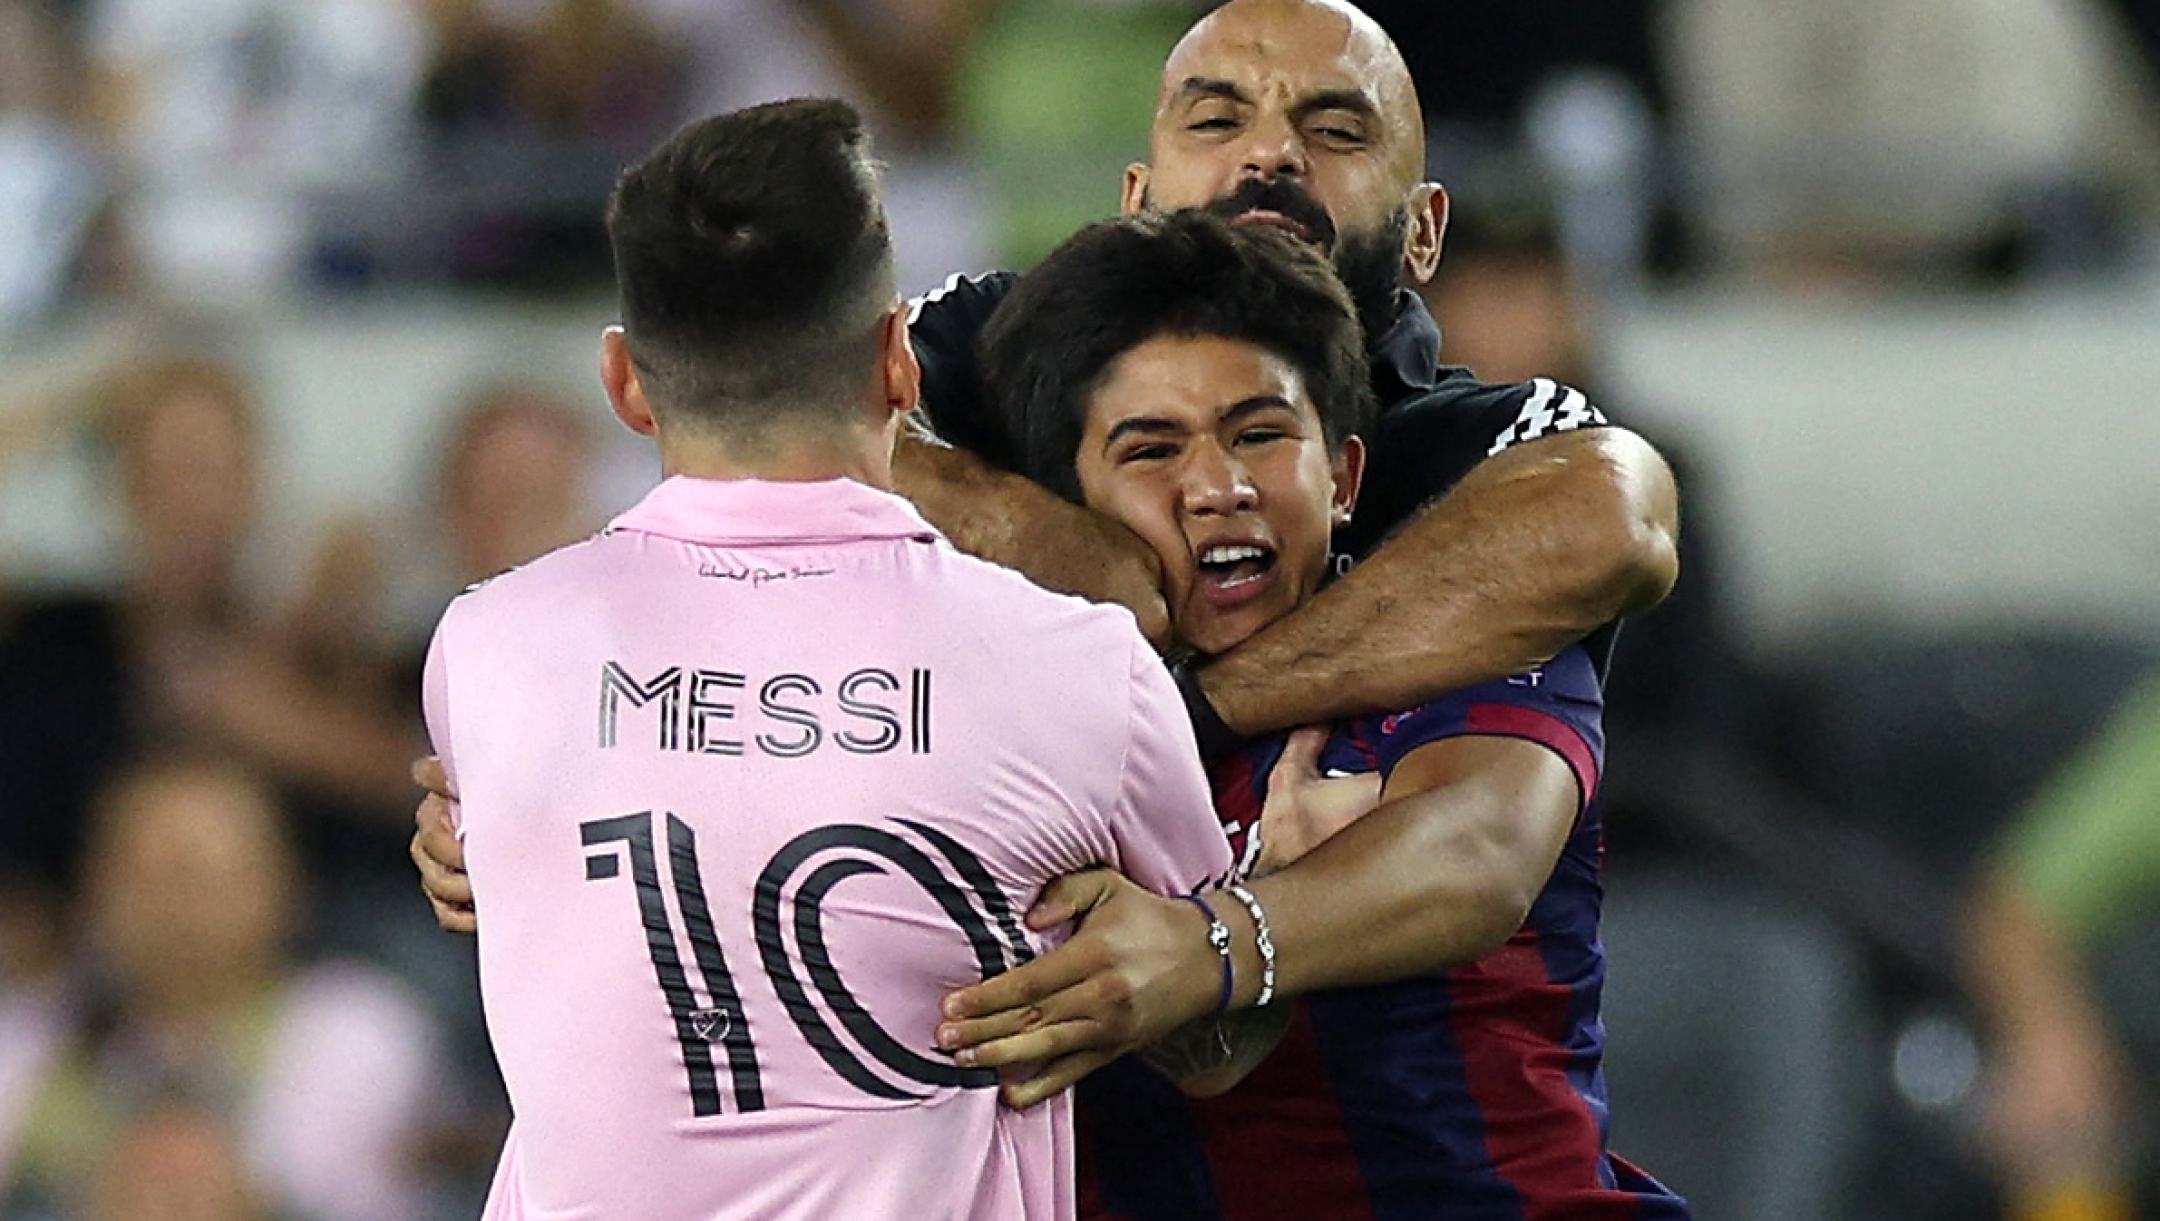 LOS ANGELES, CALIFORNIA - SEPTEMBER 03: (R) Yassine Chueko, bodyguard of Lionel Messi #10 of Inter Miami CF, pulls a fan, who ran onto the pitch, away from Messi in the second half during a match between Inter Miami CF and Los Angeles Football Club at BMO Stadium on September 03, 2023 in Los Angeles, California.   Harry How/Getty Images/AFP (Photo by Harry How / GETTY IMAGES NORTH AMERICA / Getty Images via AFP)